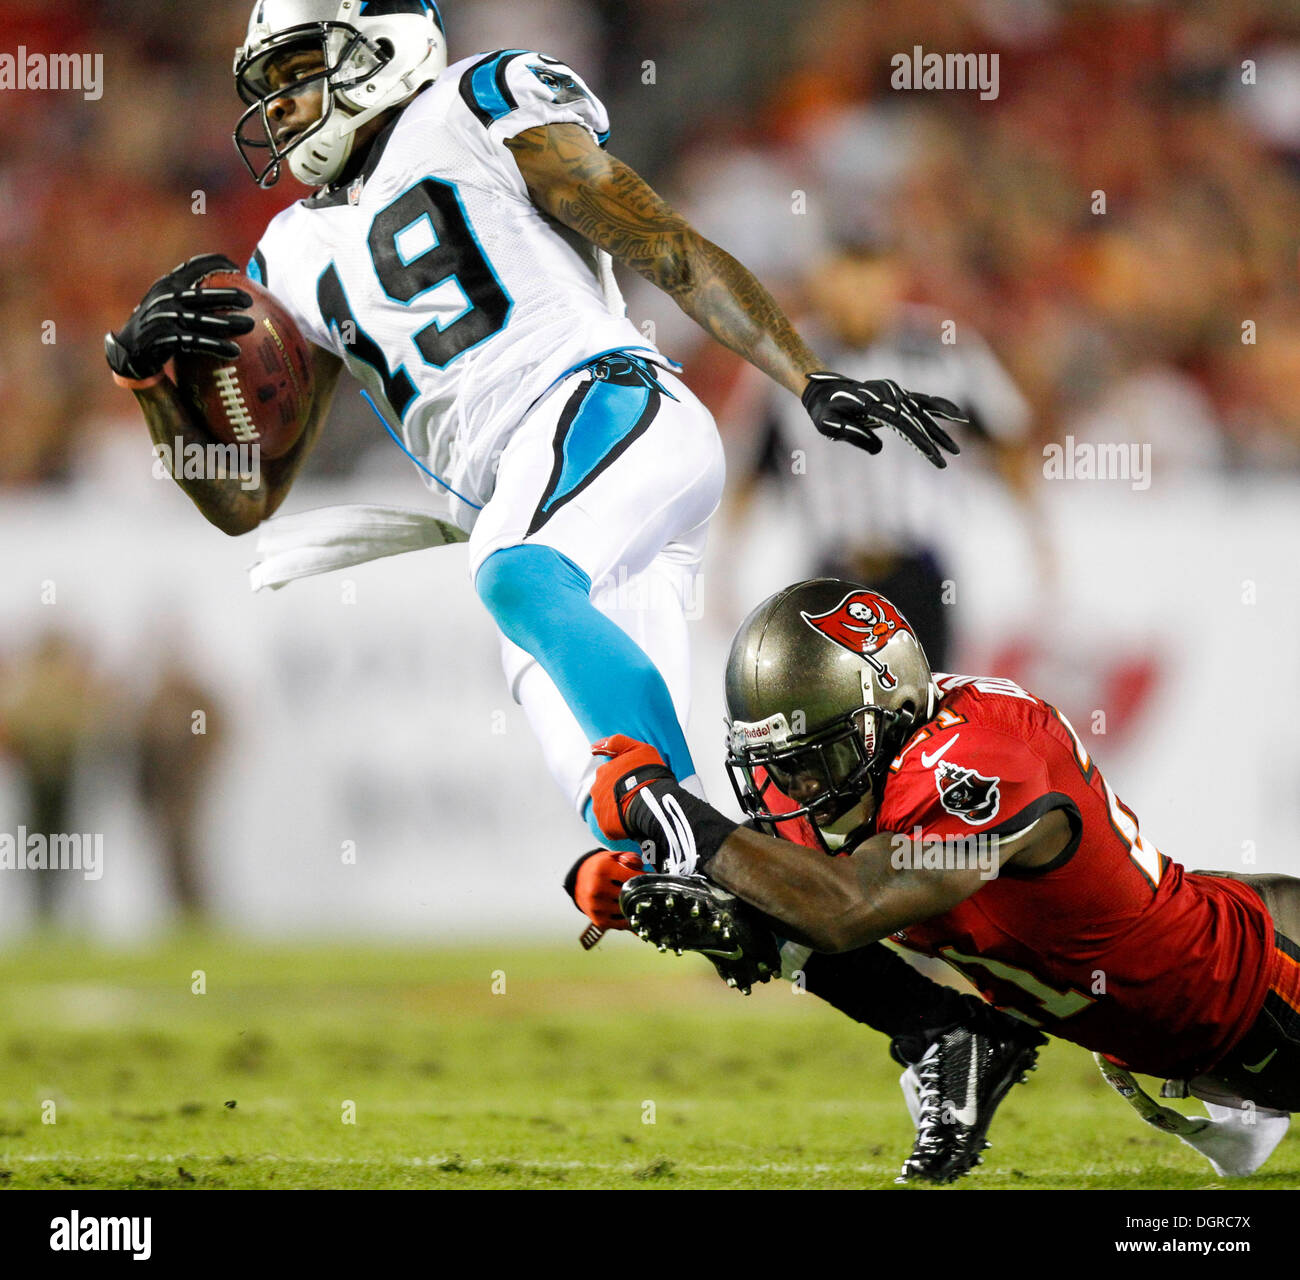 Tampa, Florida, USA. 24th Oct, 2013. Carolina Panthers wide receiver TED GINN (19) gets dragged down by Tampa Bay Buccaneers defensive back MICHAEL ADAMS (21) on a kickoff return in the first quarter at Raymond James Stadium. © Will Vragovic/Tampa Bay Times/ZUMAPRESS.com/Alamy Live News Stock Photo